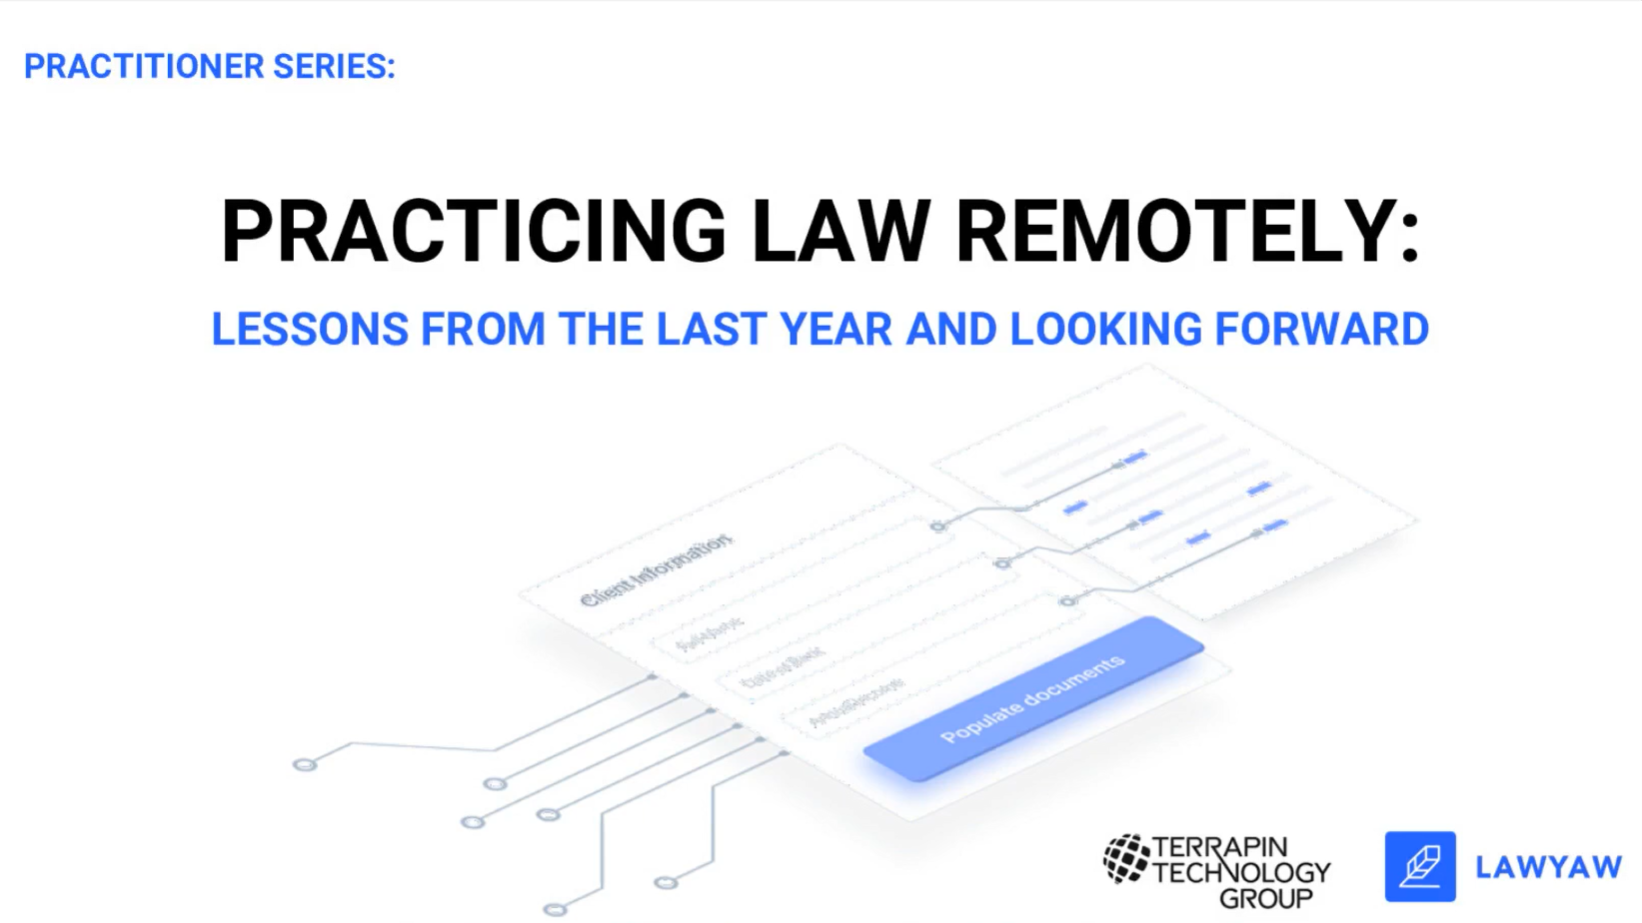 Practicing Law Remotely - Lessons and Best Practices from the Last Year